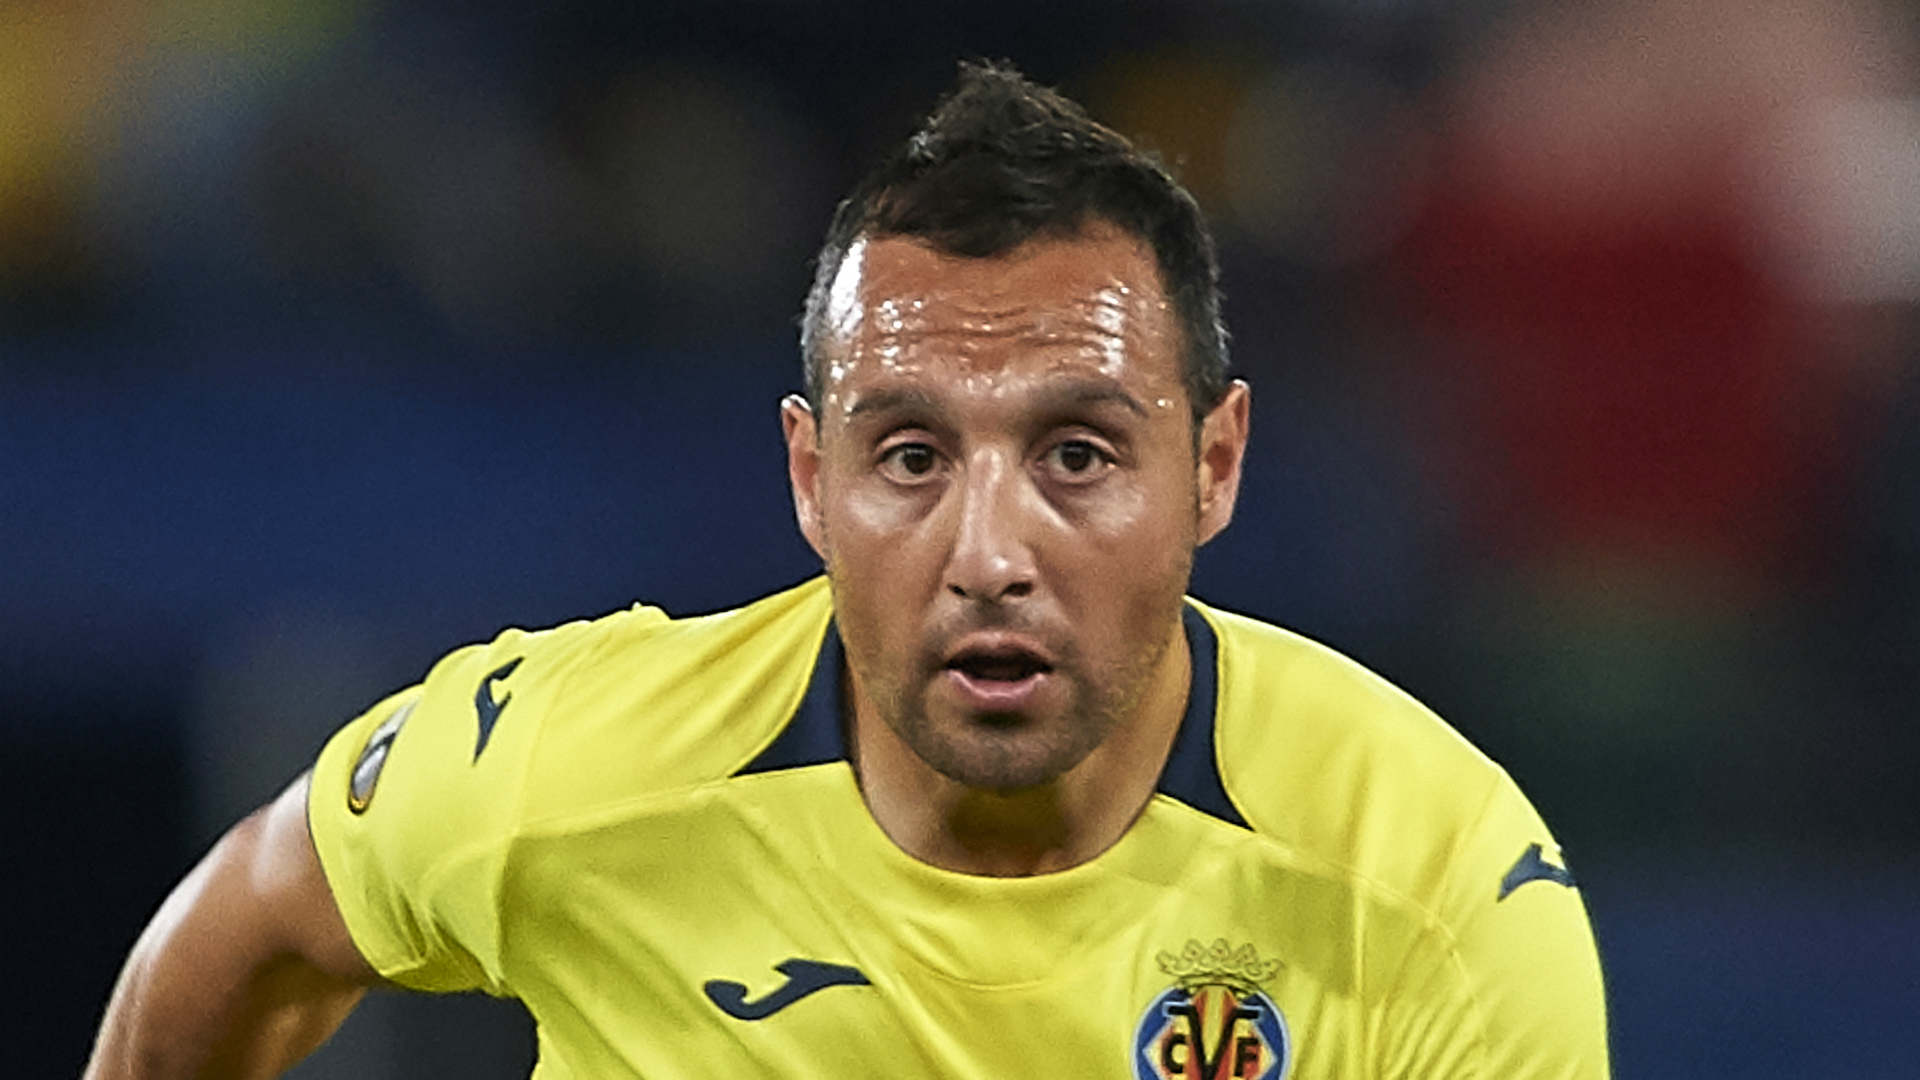 Santi Cazorla's career looked to be grinding to a halt, but the Spaniard has been a player reborn with Villarreal and Euro 2020 beckons.